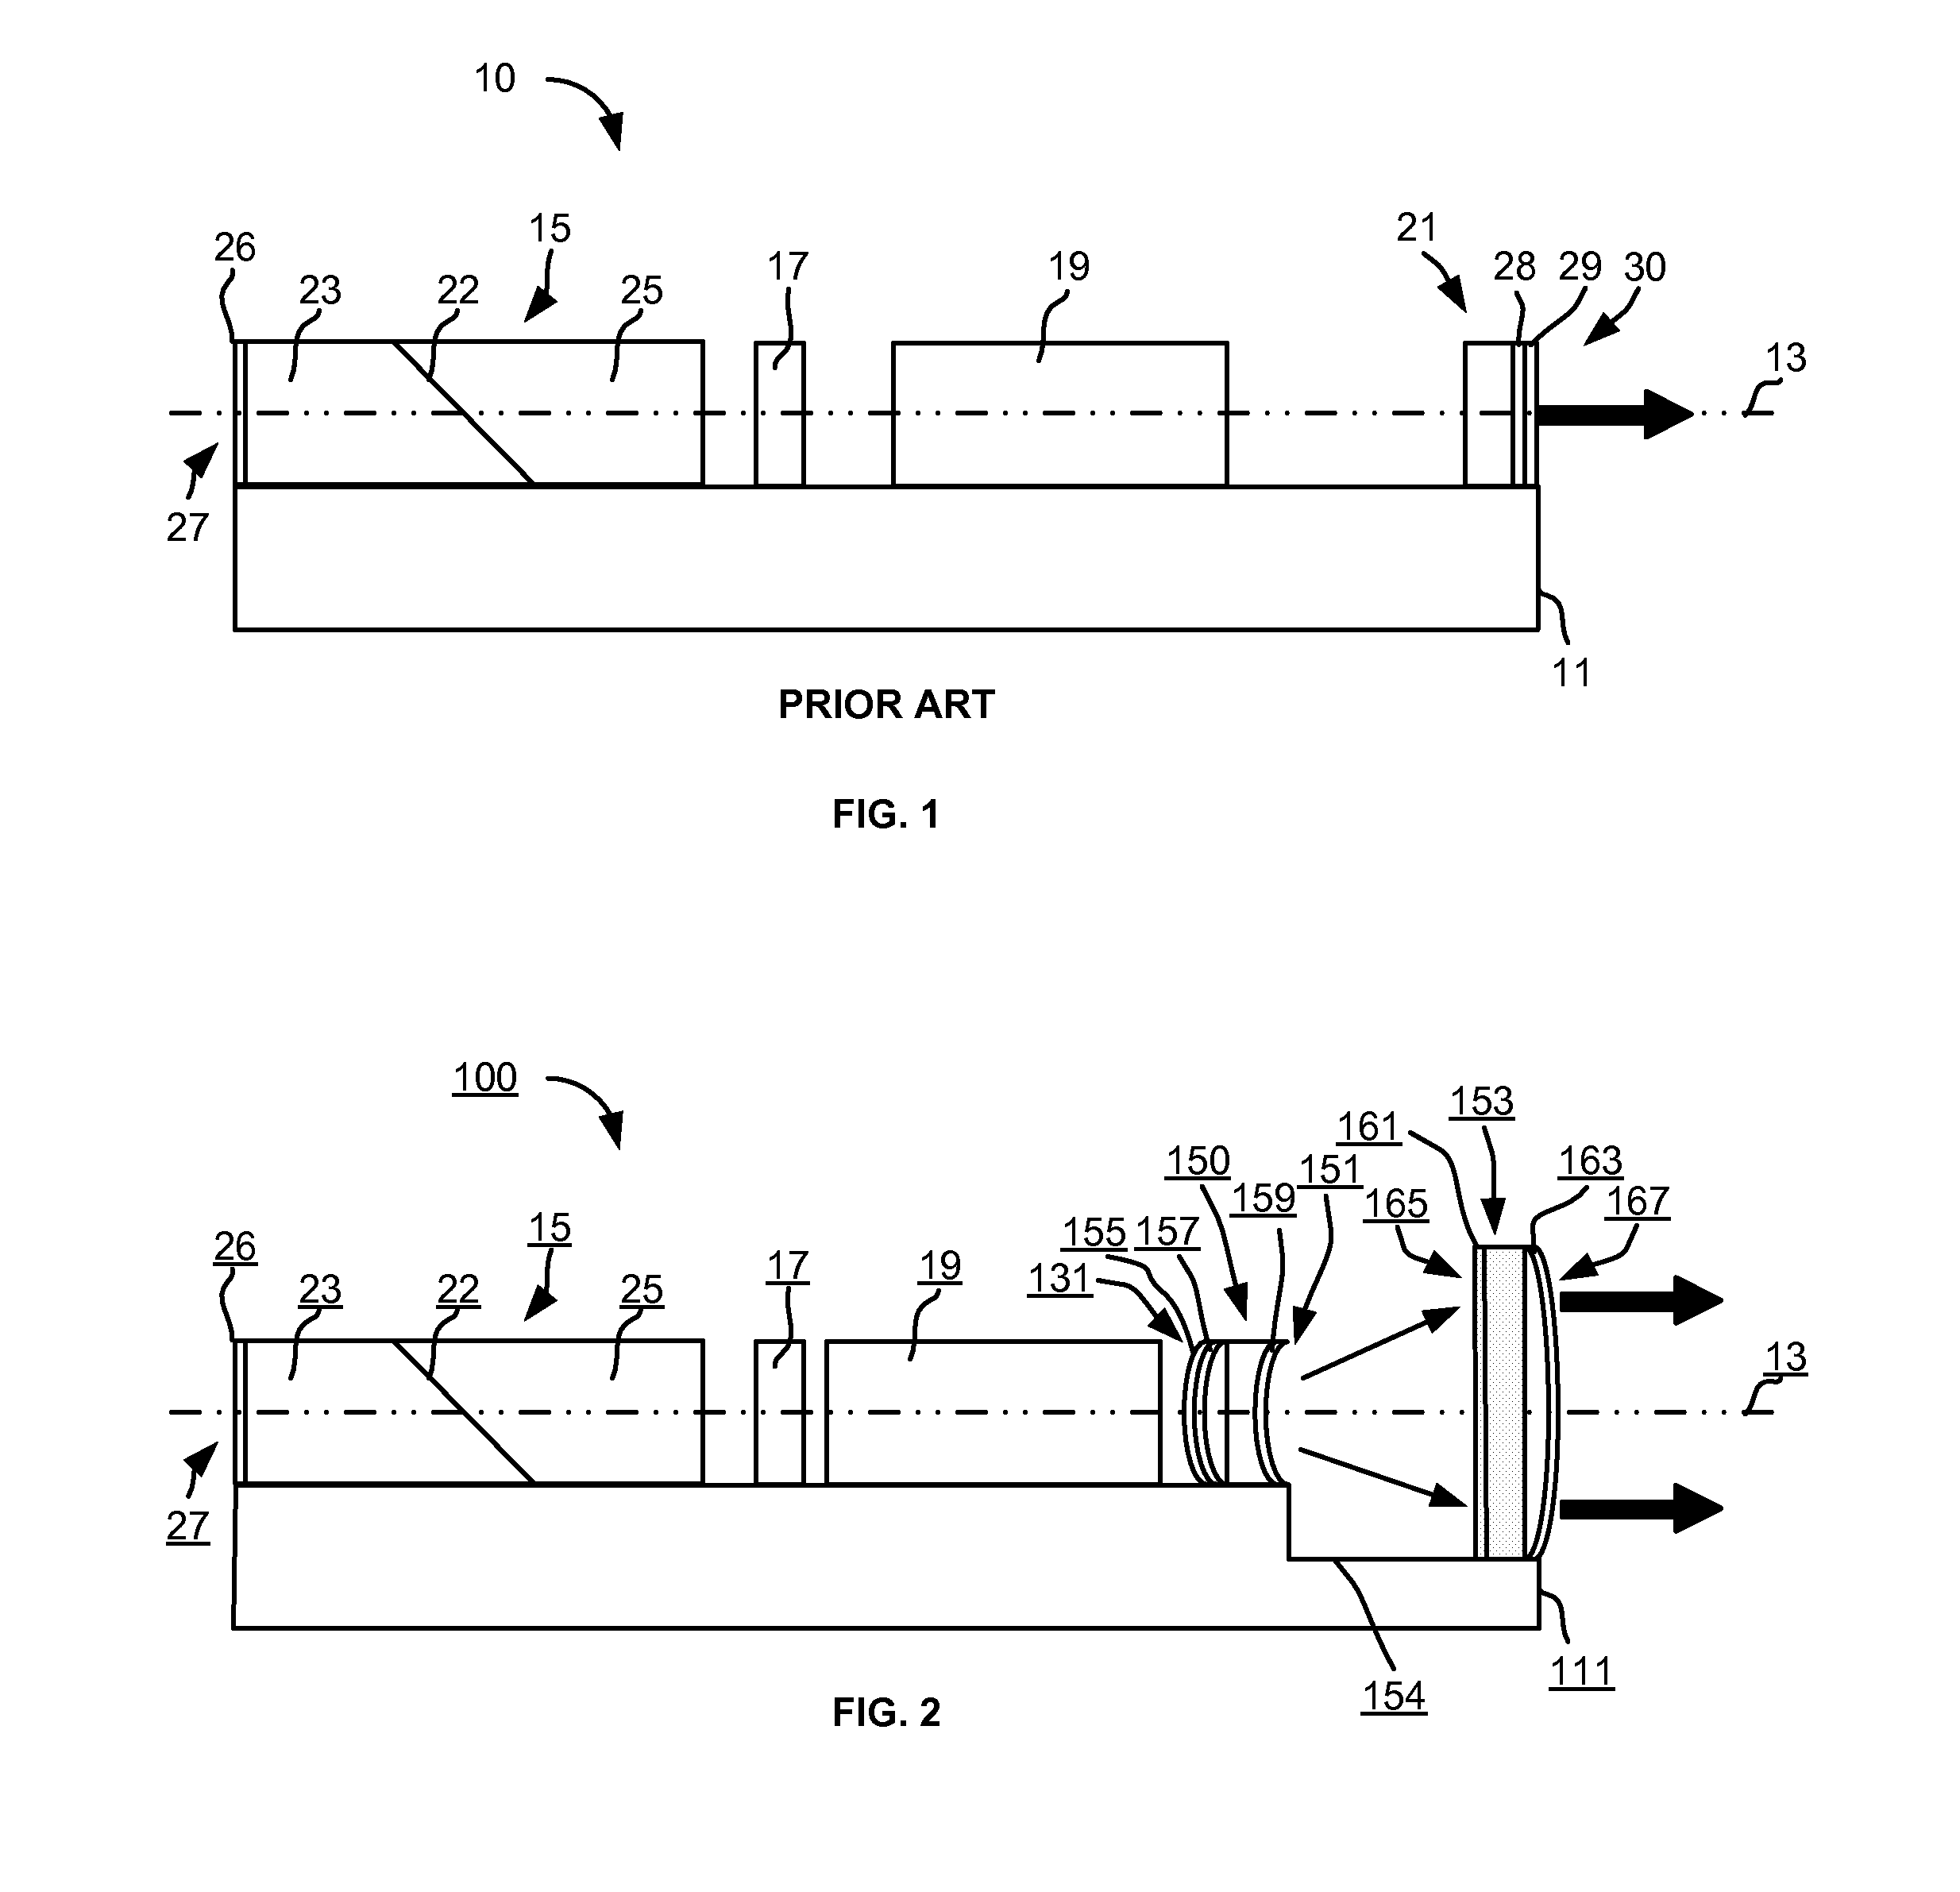 Unstable monoblock laser cavity with integrated beam expander